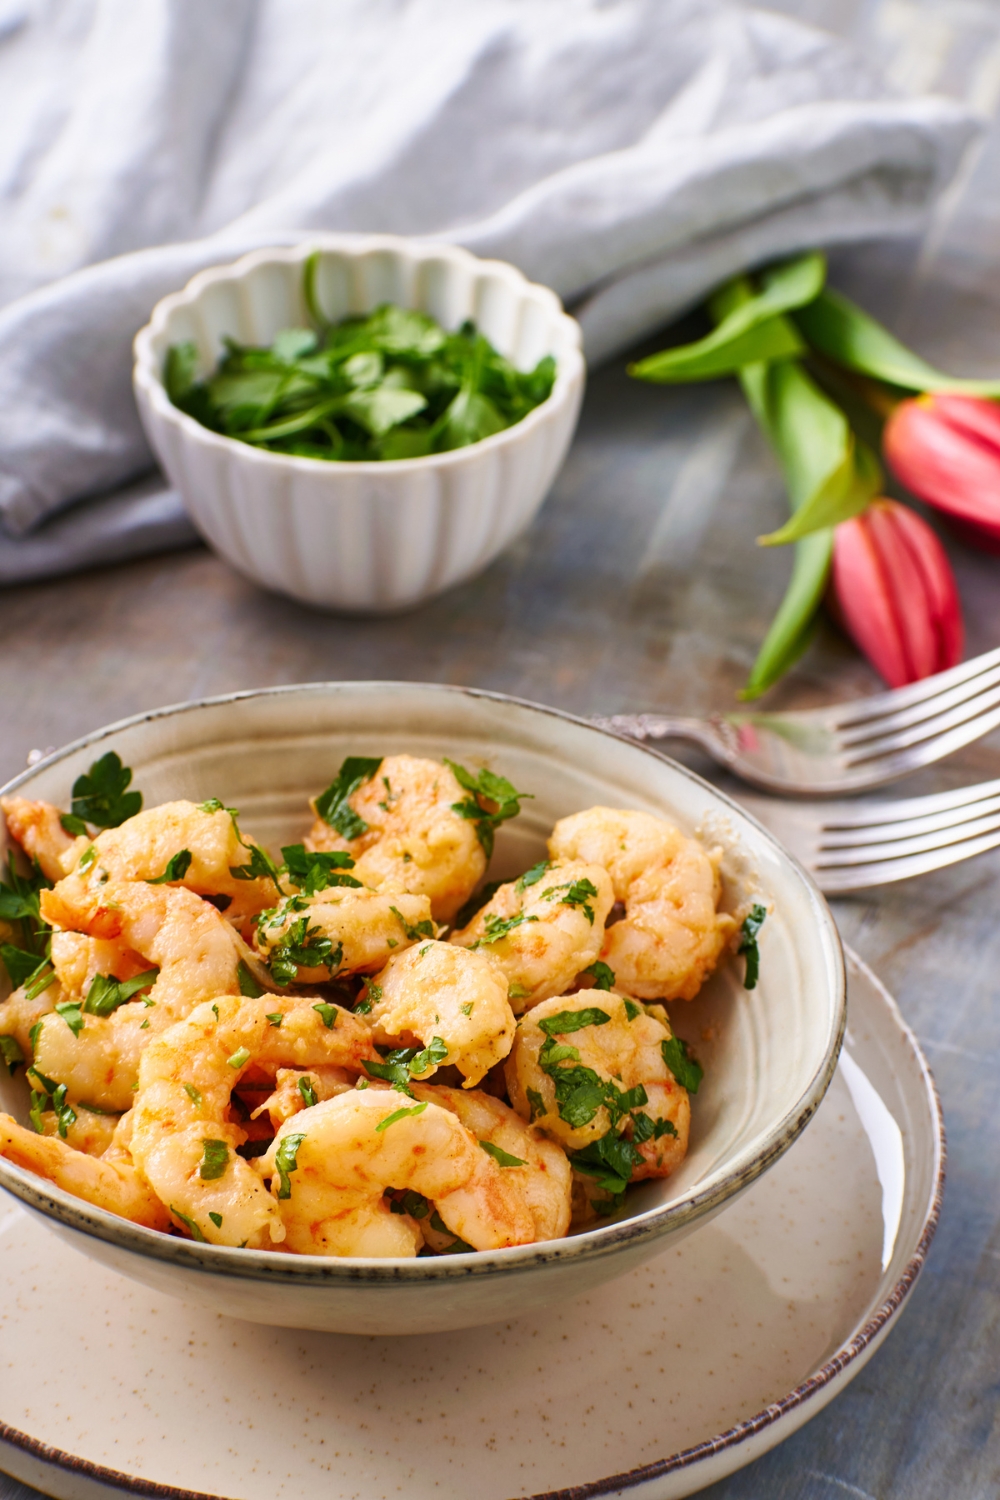 Cooked shrimp garnished with fresh herbs in a bowl. The bowl is on top of a plate and two forks are next to it.